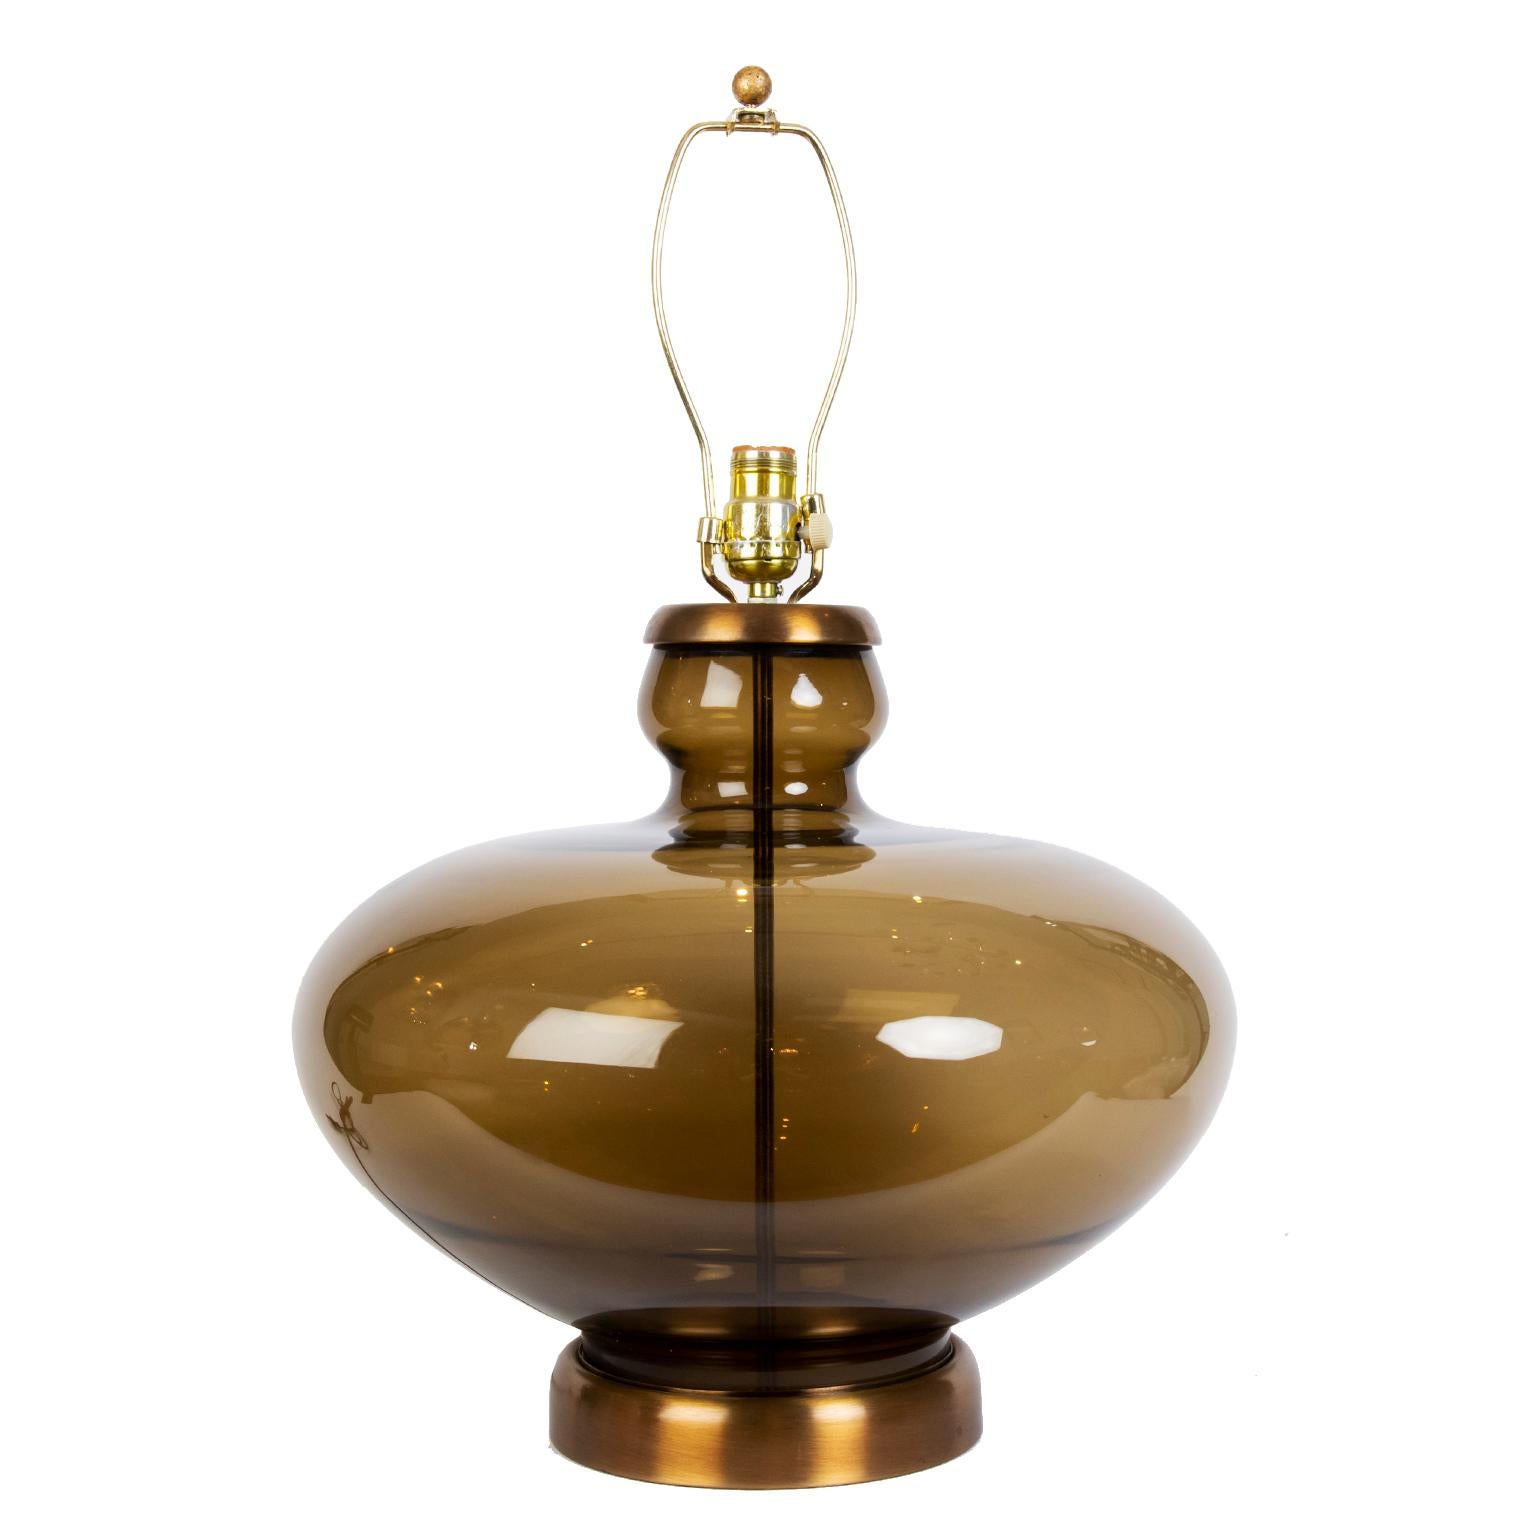 These gorgeous large exotic urn shaped vintage smoked glass lamps with an antique brass metal base and cap are fitted with new shades (optional) and a dimmer switch.